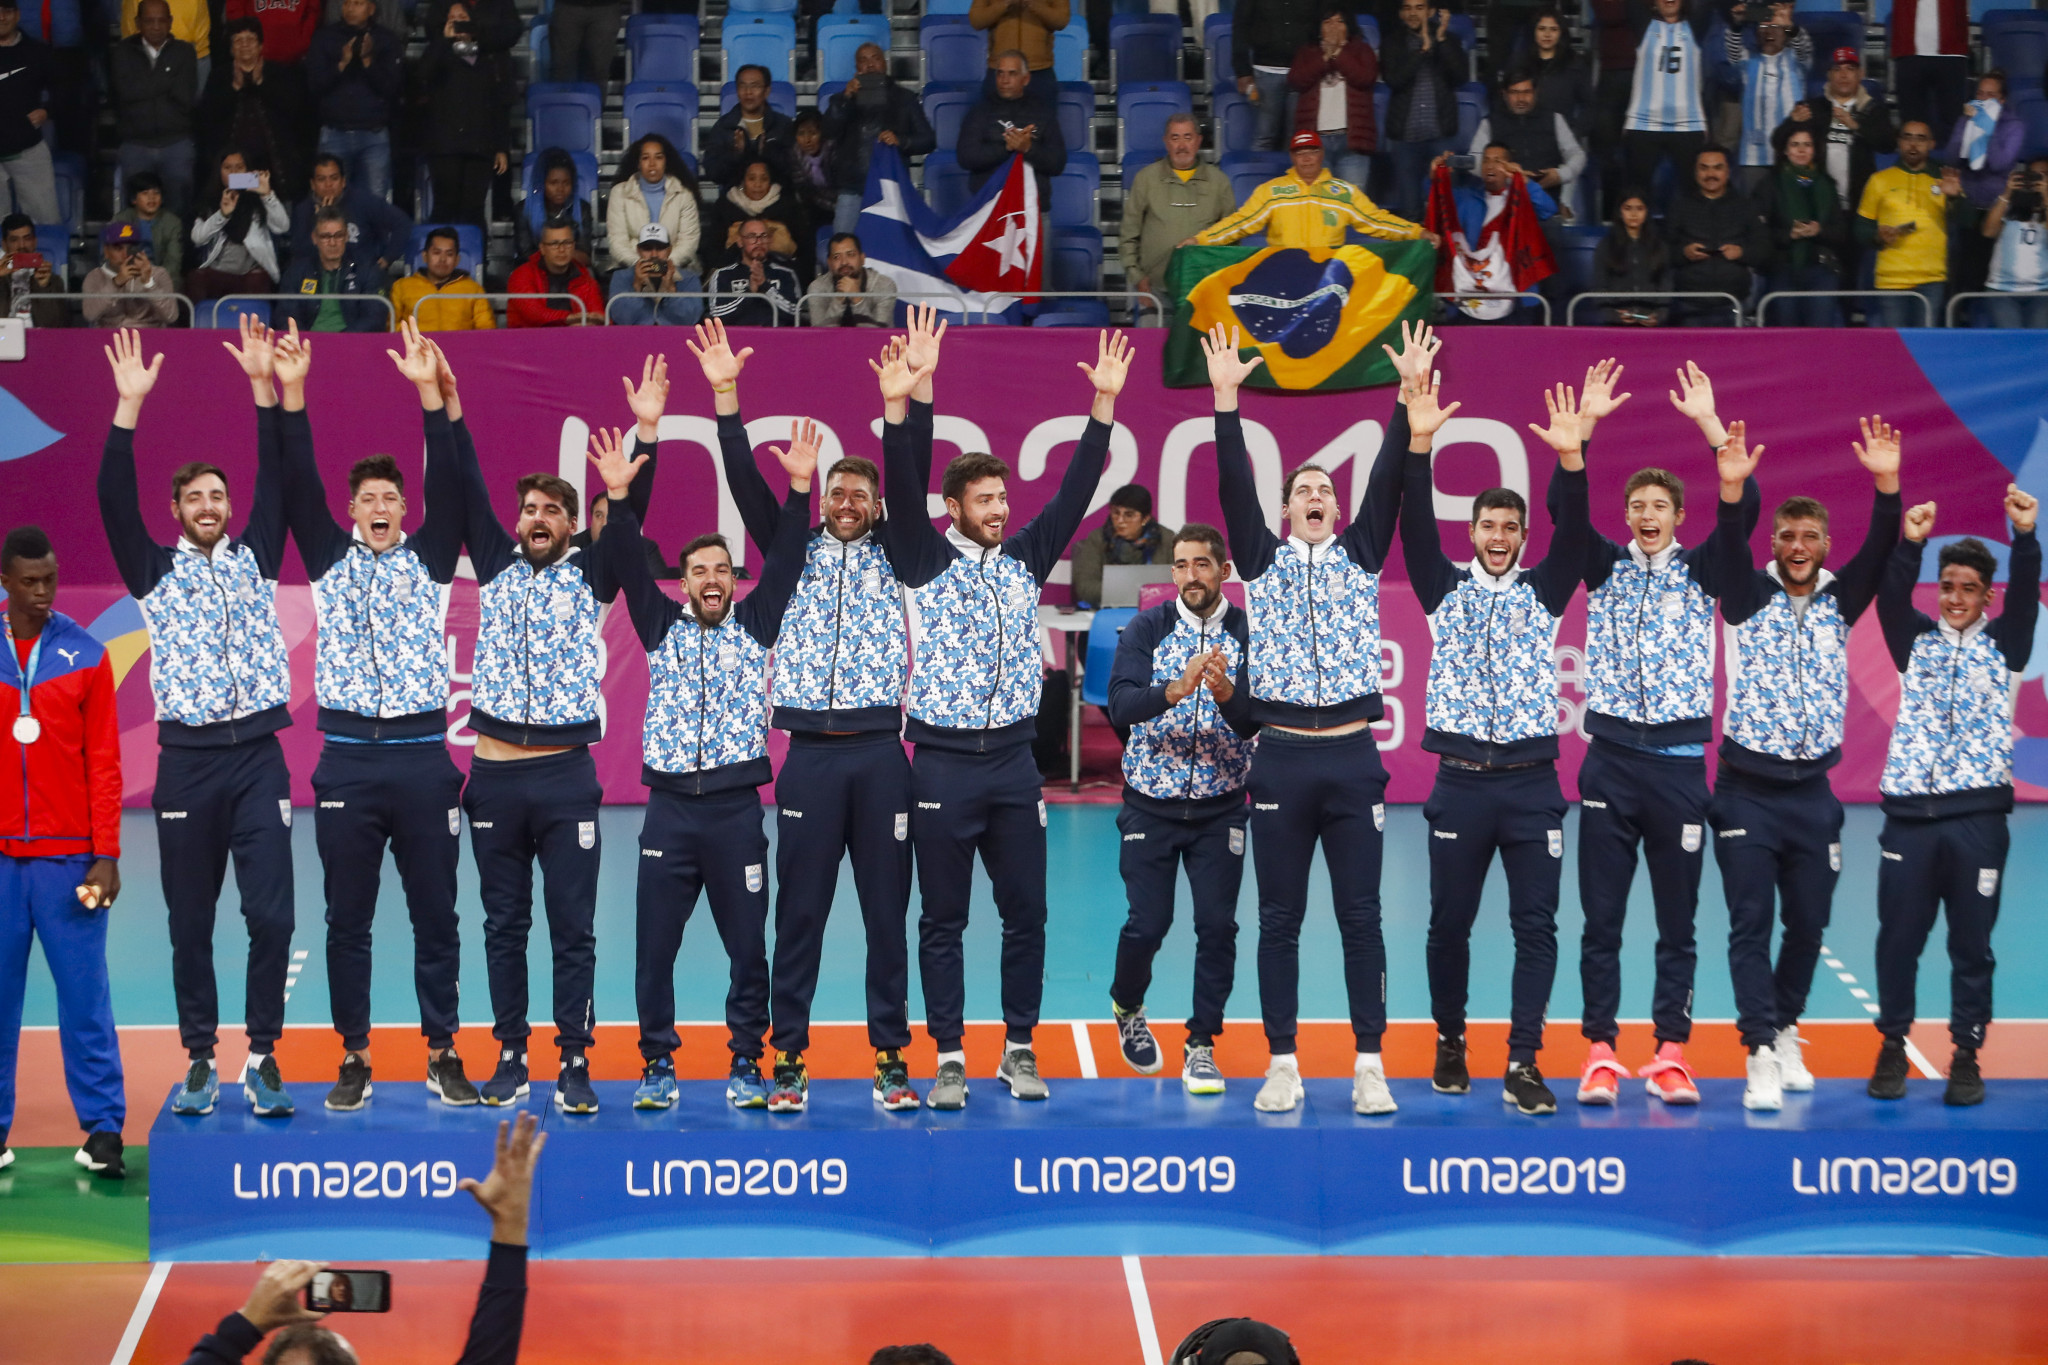 They defeated their opponents in straight sets, winning gold ©Lima 2019